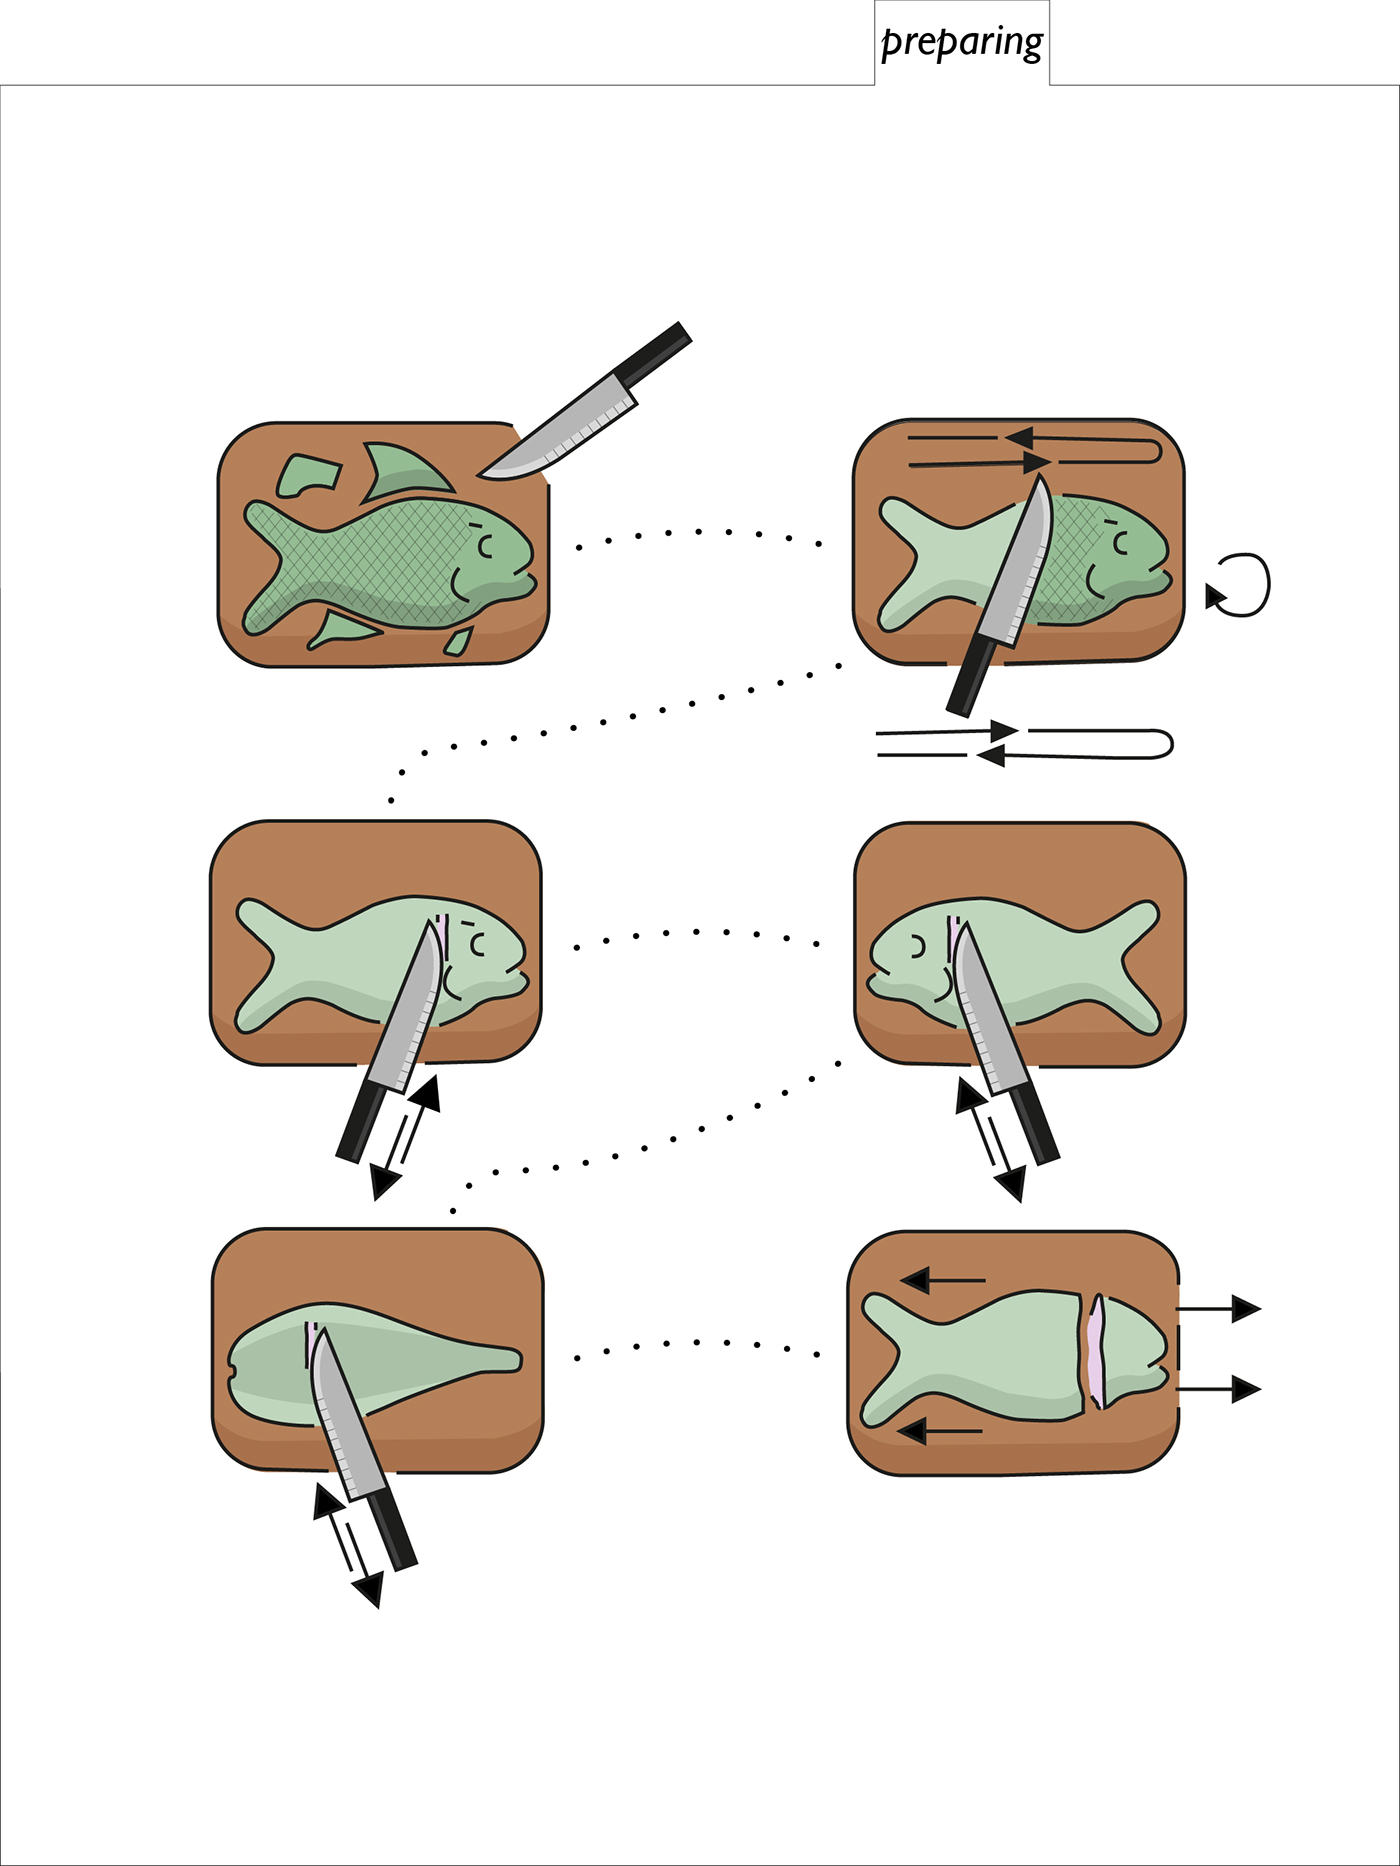 fishing pictograms instructions outdoors fish UK prepare gutting cooking cards